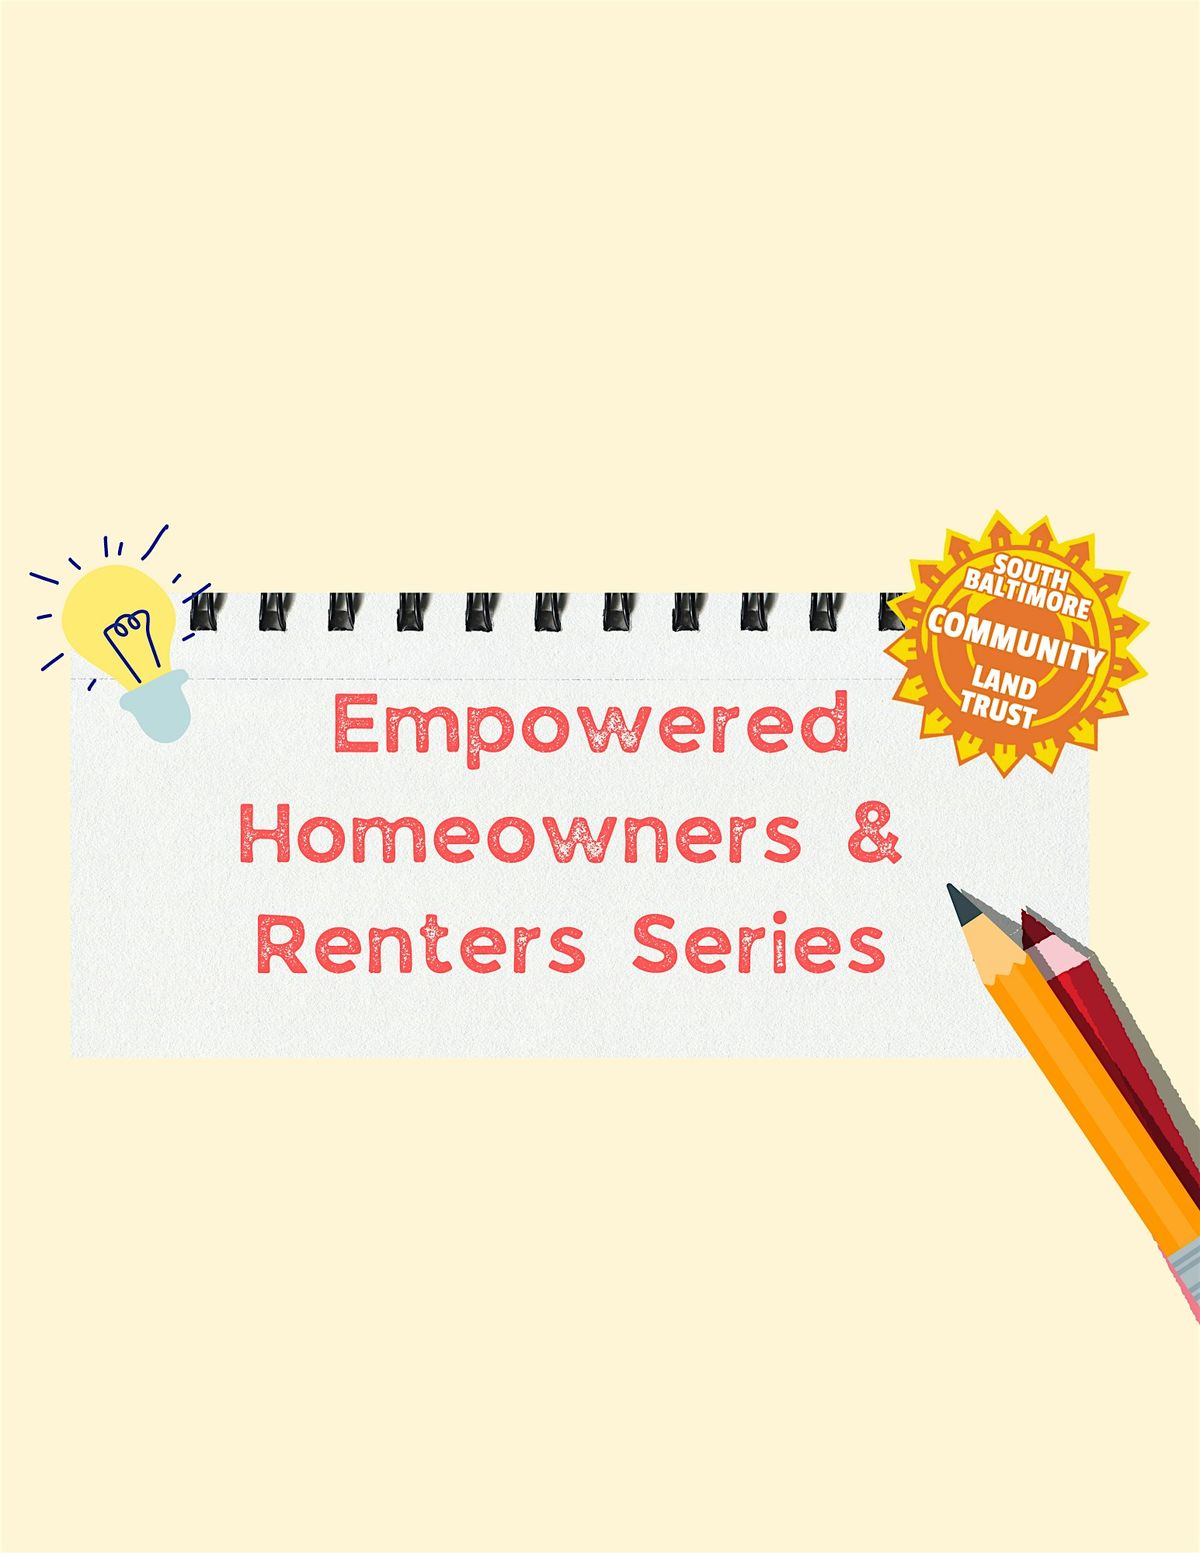 Empowered Homeowners & Renters Series - July